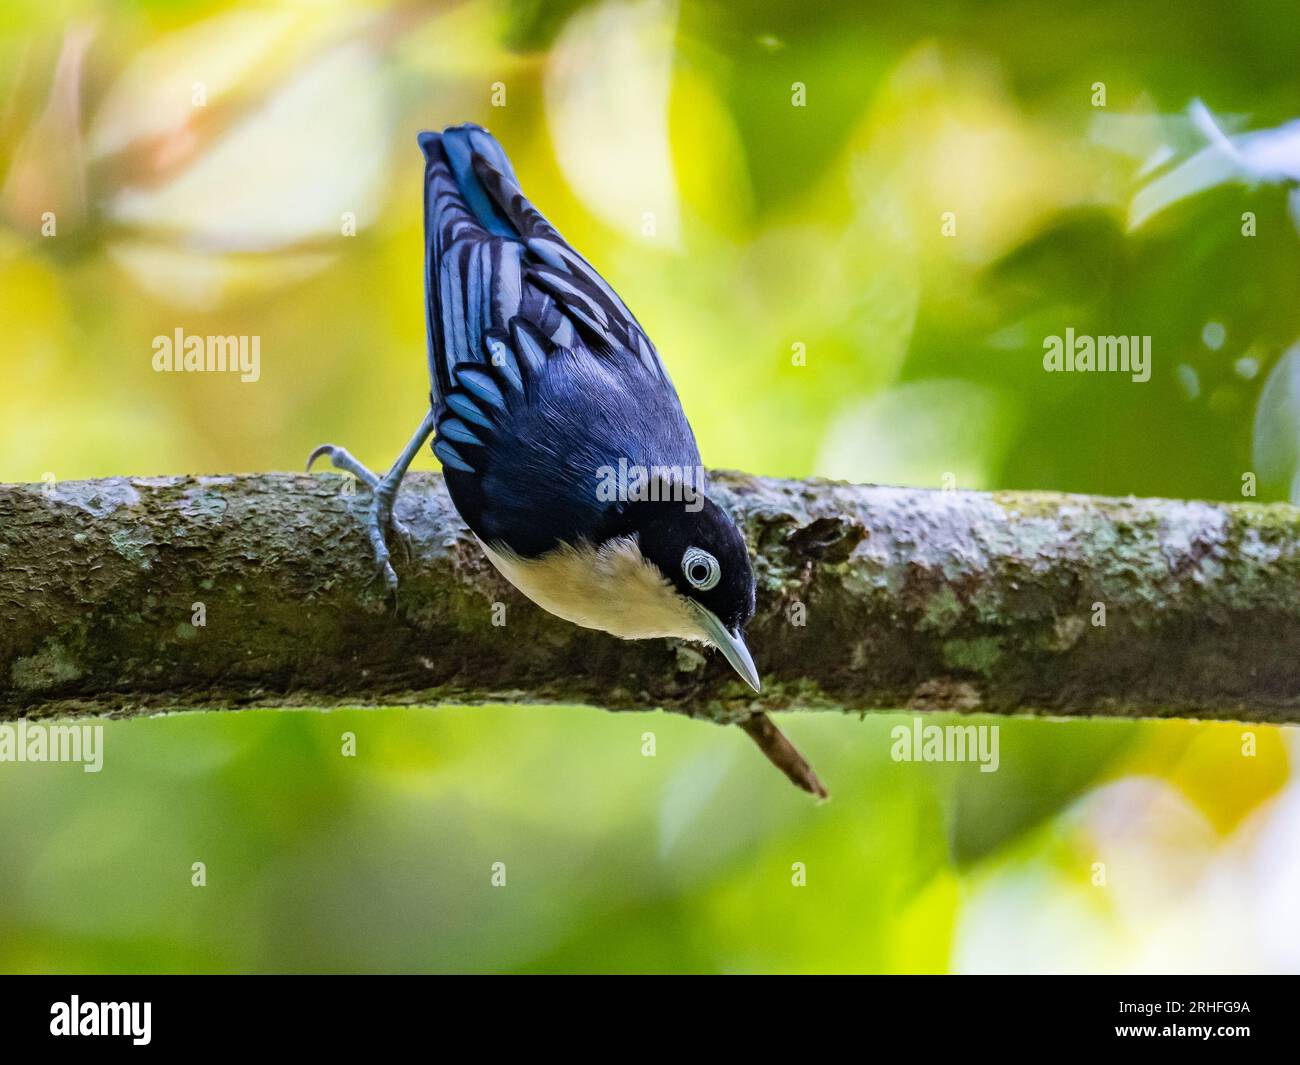 A Blue Nuthatch (Sitta azurea) foraging on a tree trunk. Java, Indonesia. Stock Photo